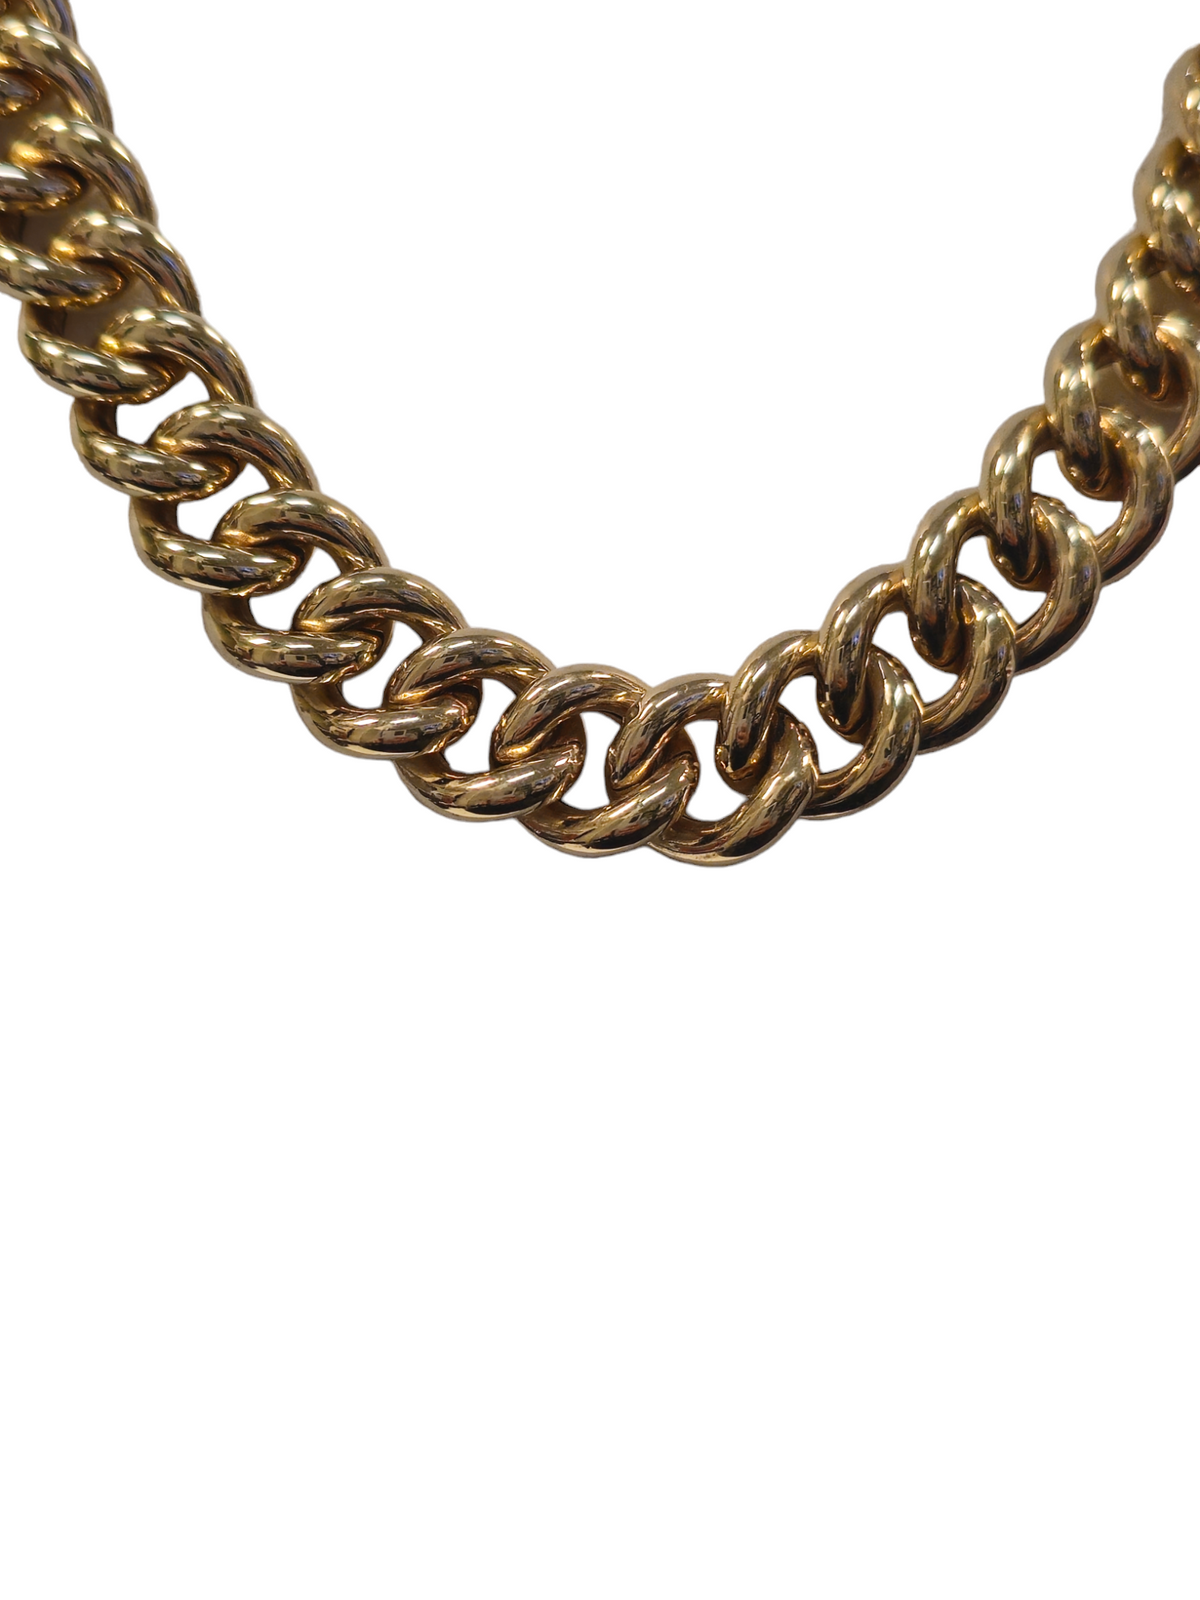 Hollow Rounded Curb Link necklace with toggle clasp in solid 14-karat yellow & white gold